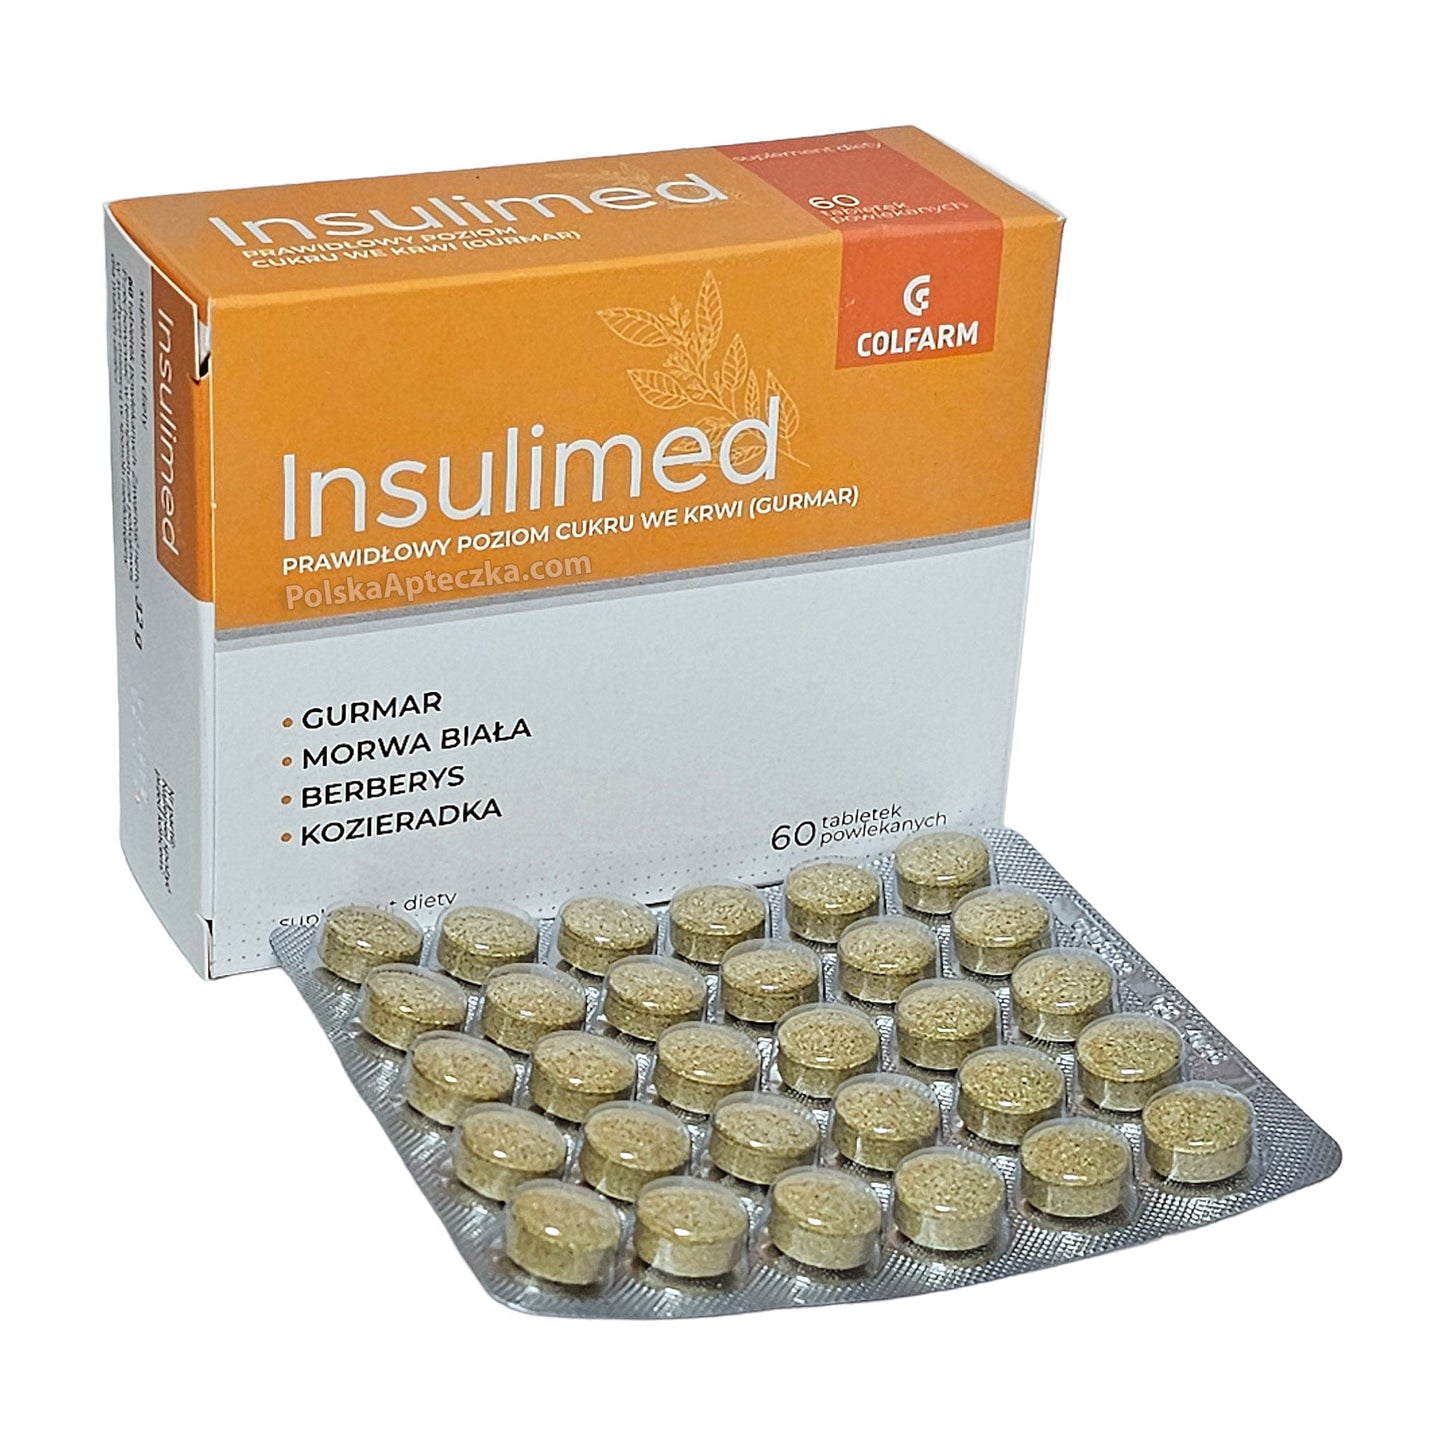 insulimed tablets